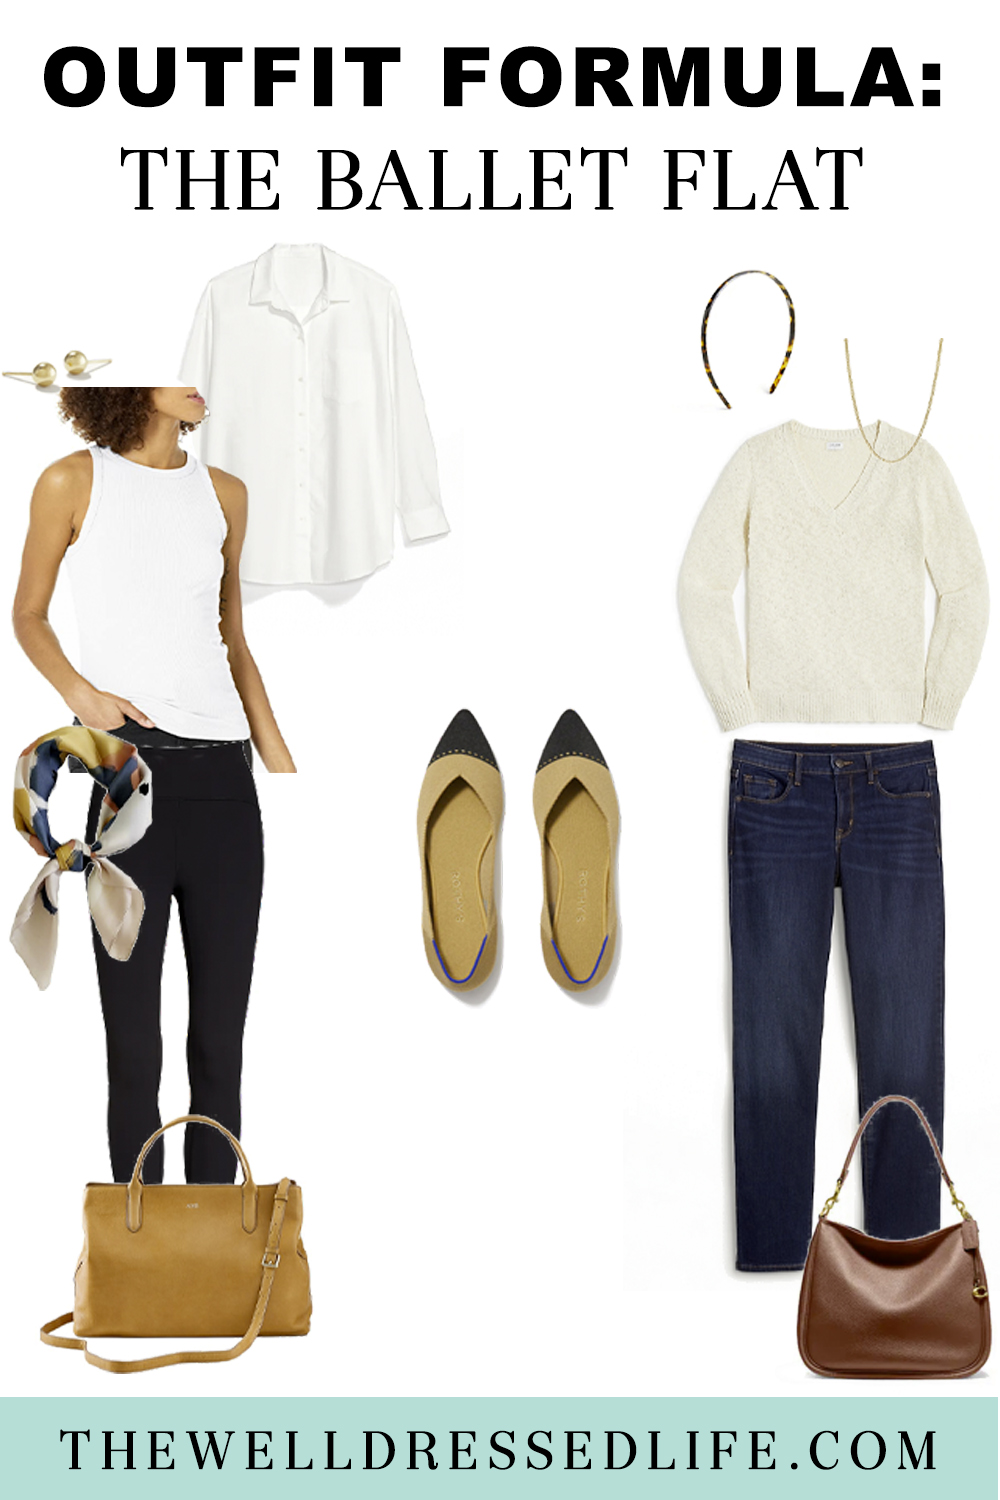 Outfit Formula: The Ballet Flat